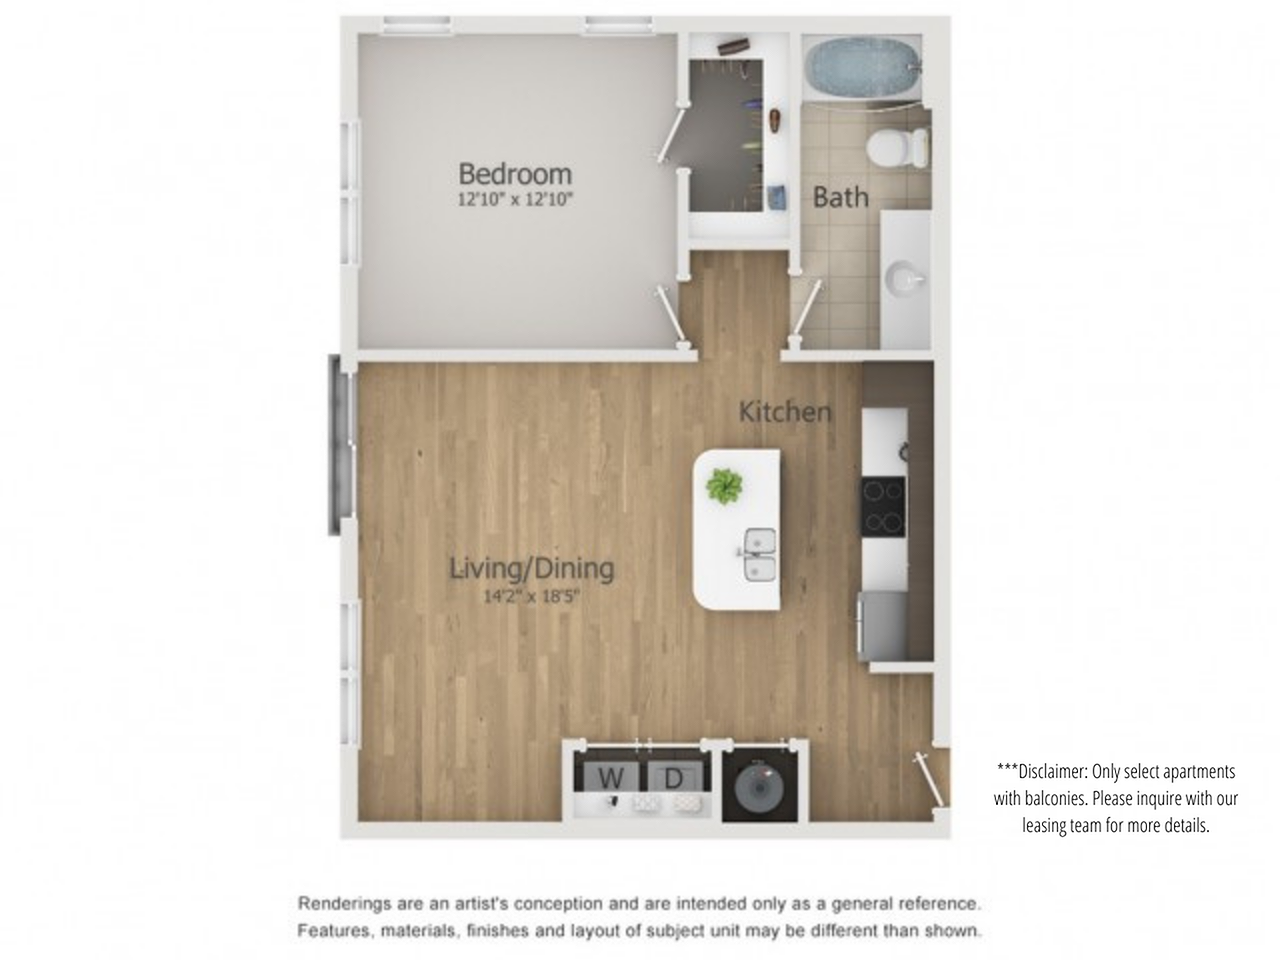 Embassy Floor Plan | 1 Bedroom with 1 Bath | 782 Square Feet | The Melrose | Apartment Homes